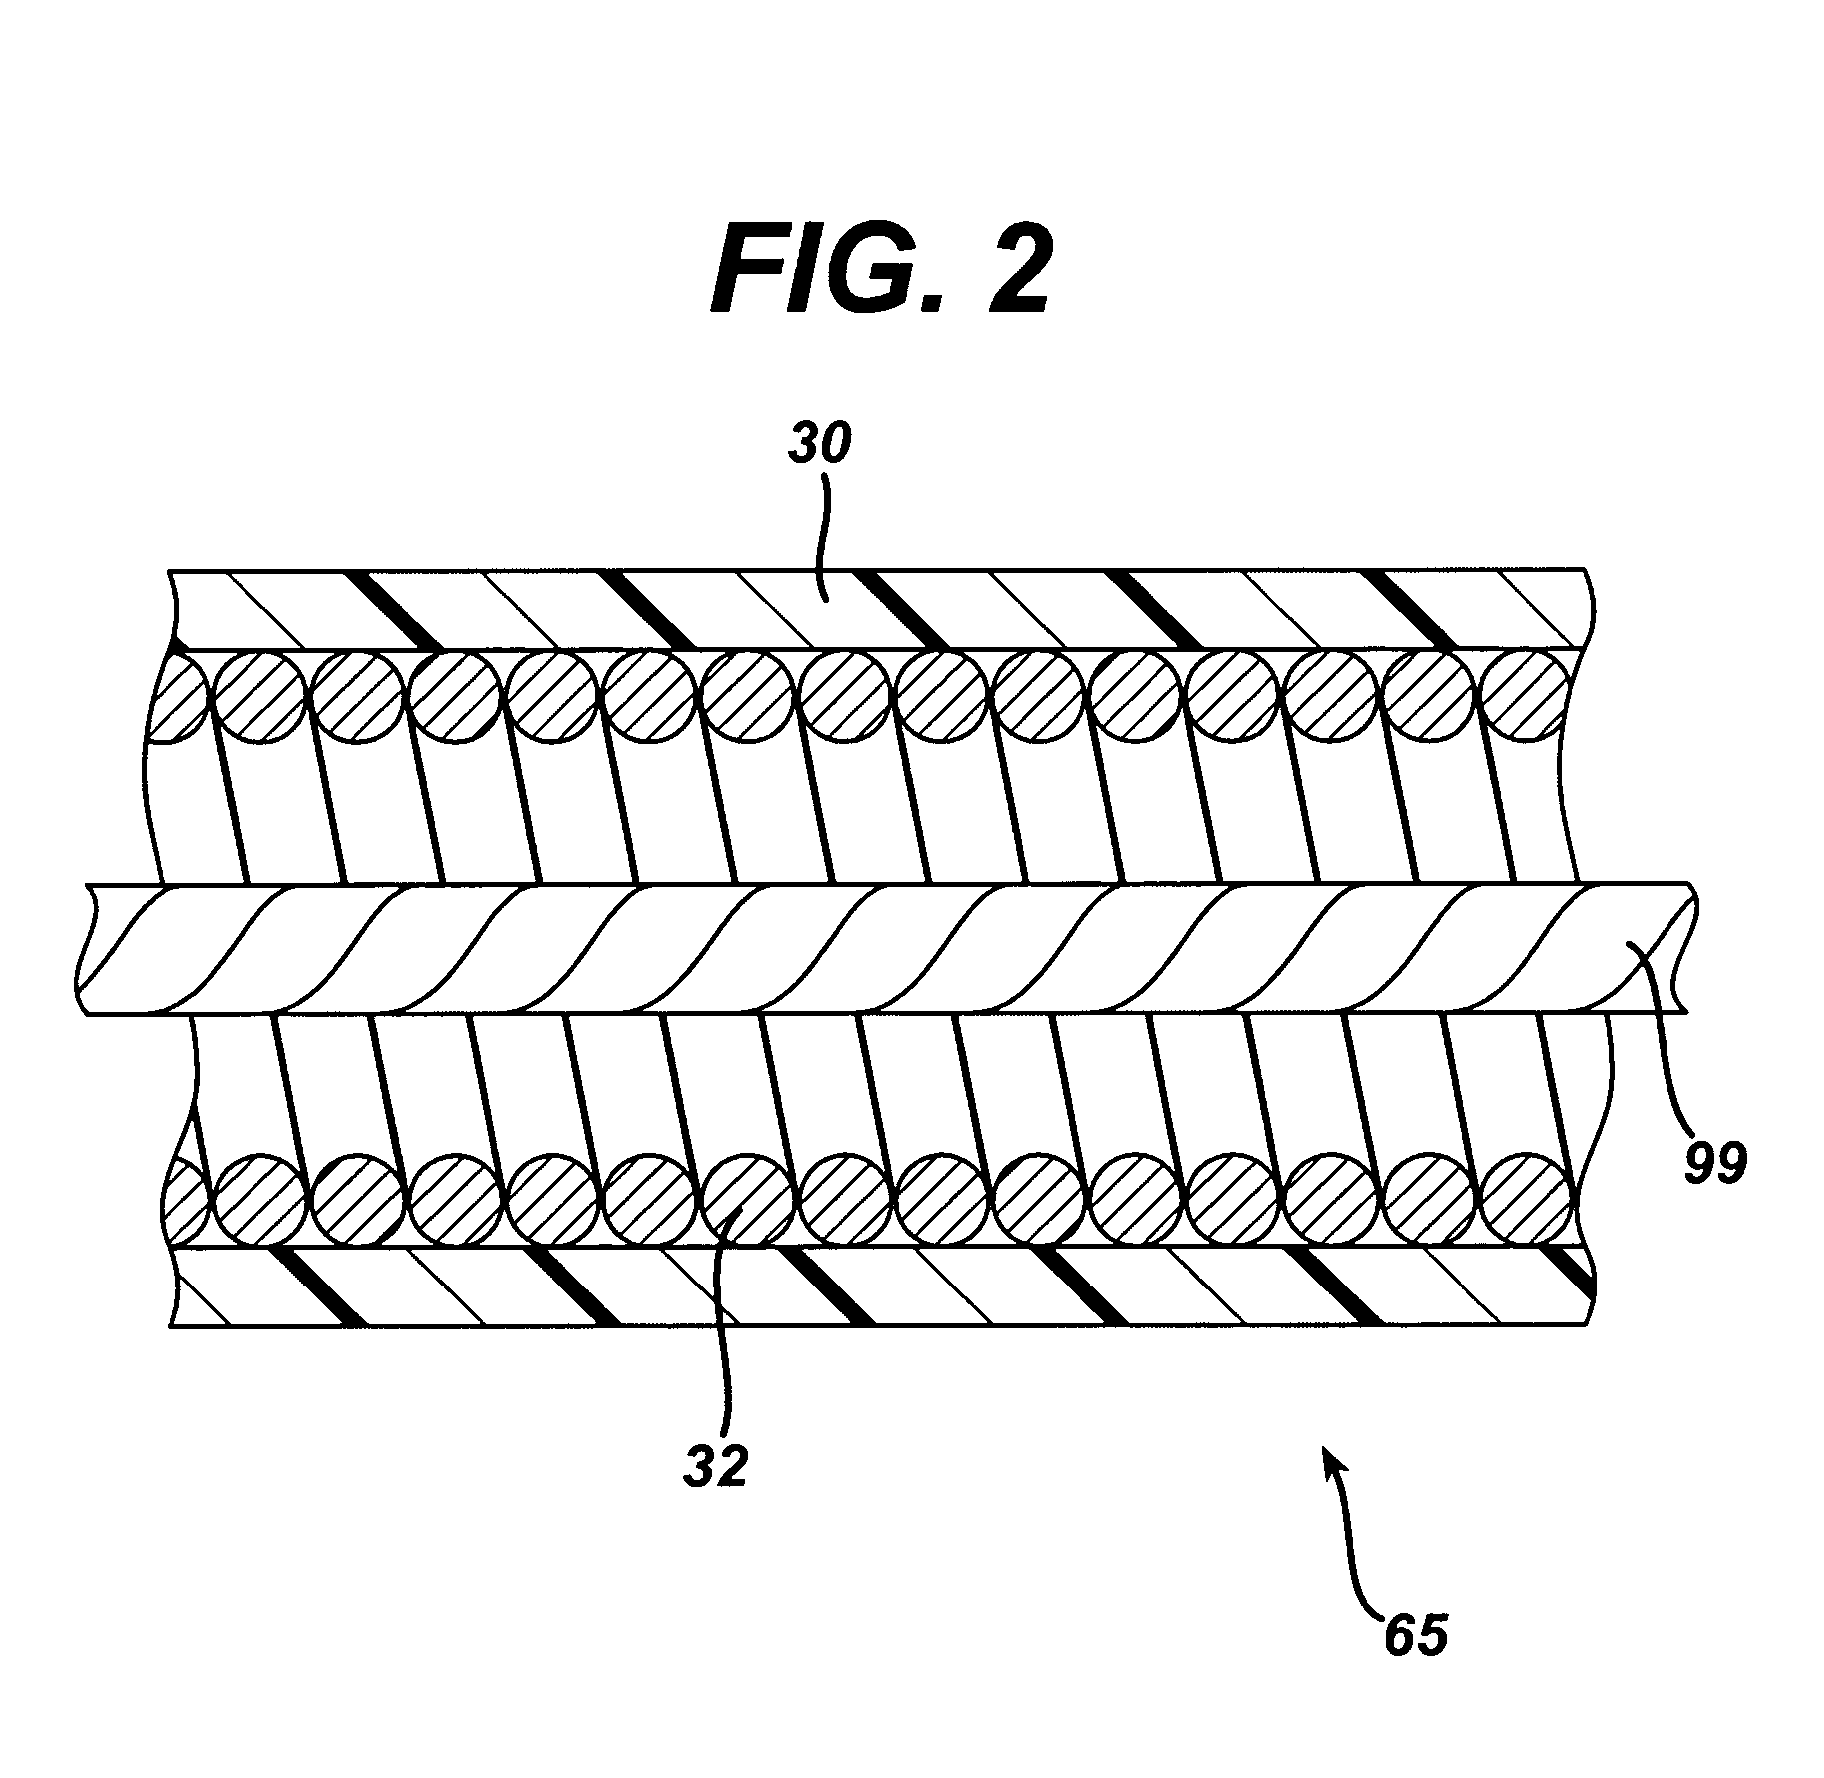 Method of operating an endoscopic device with one hand